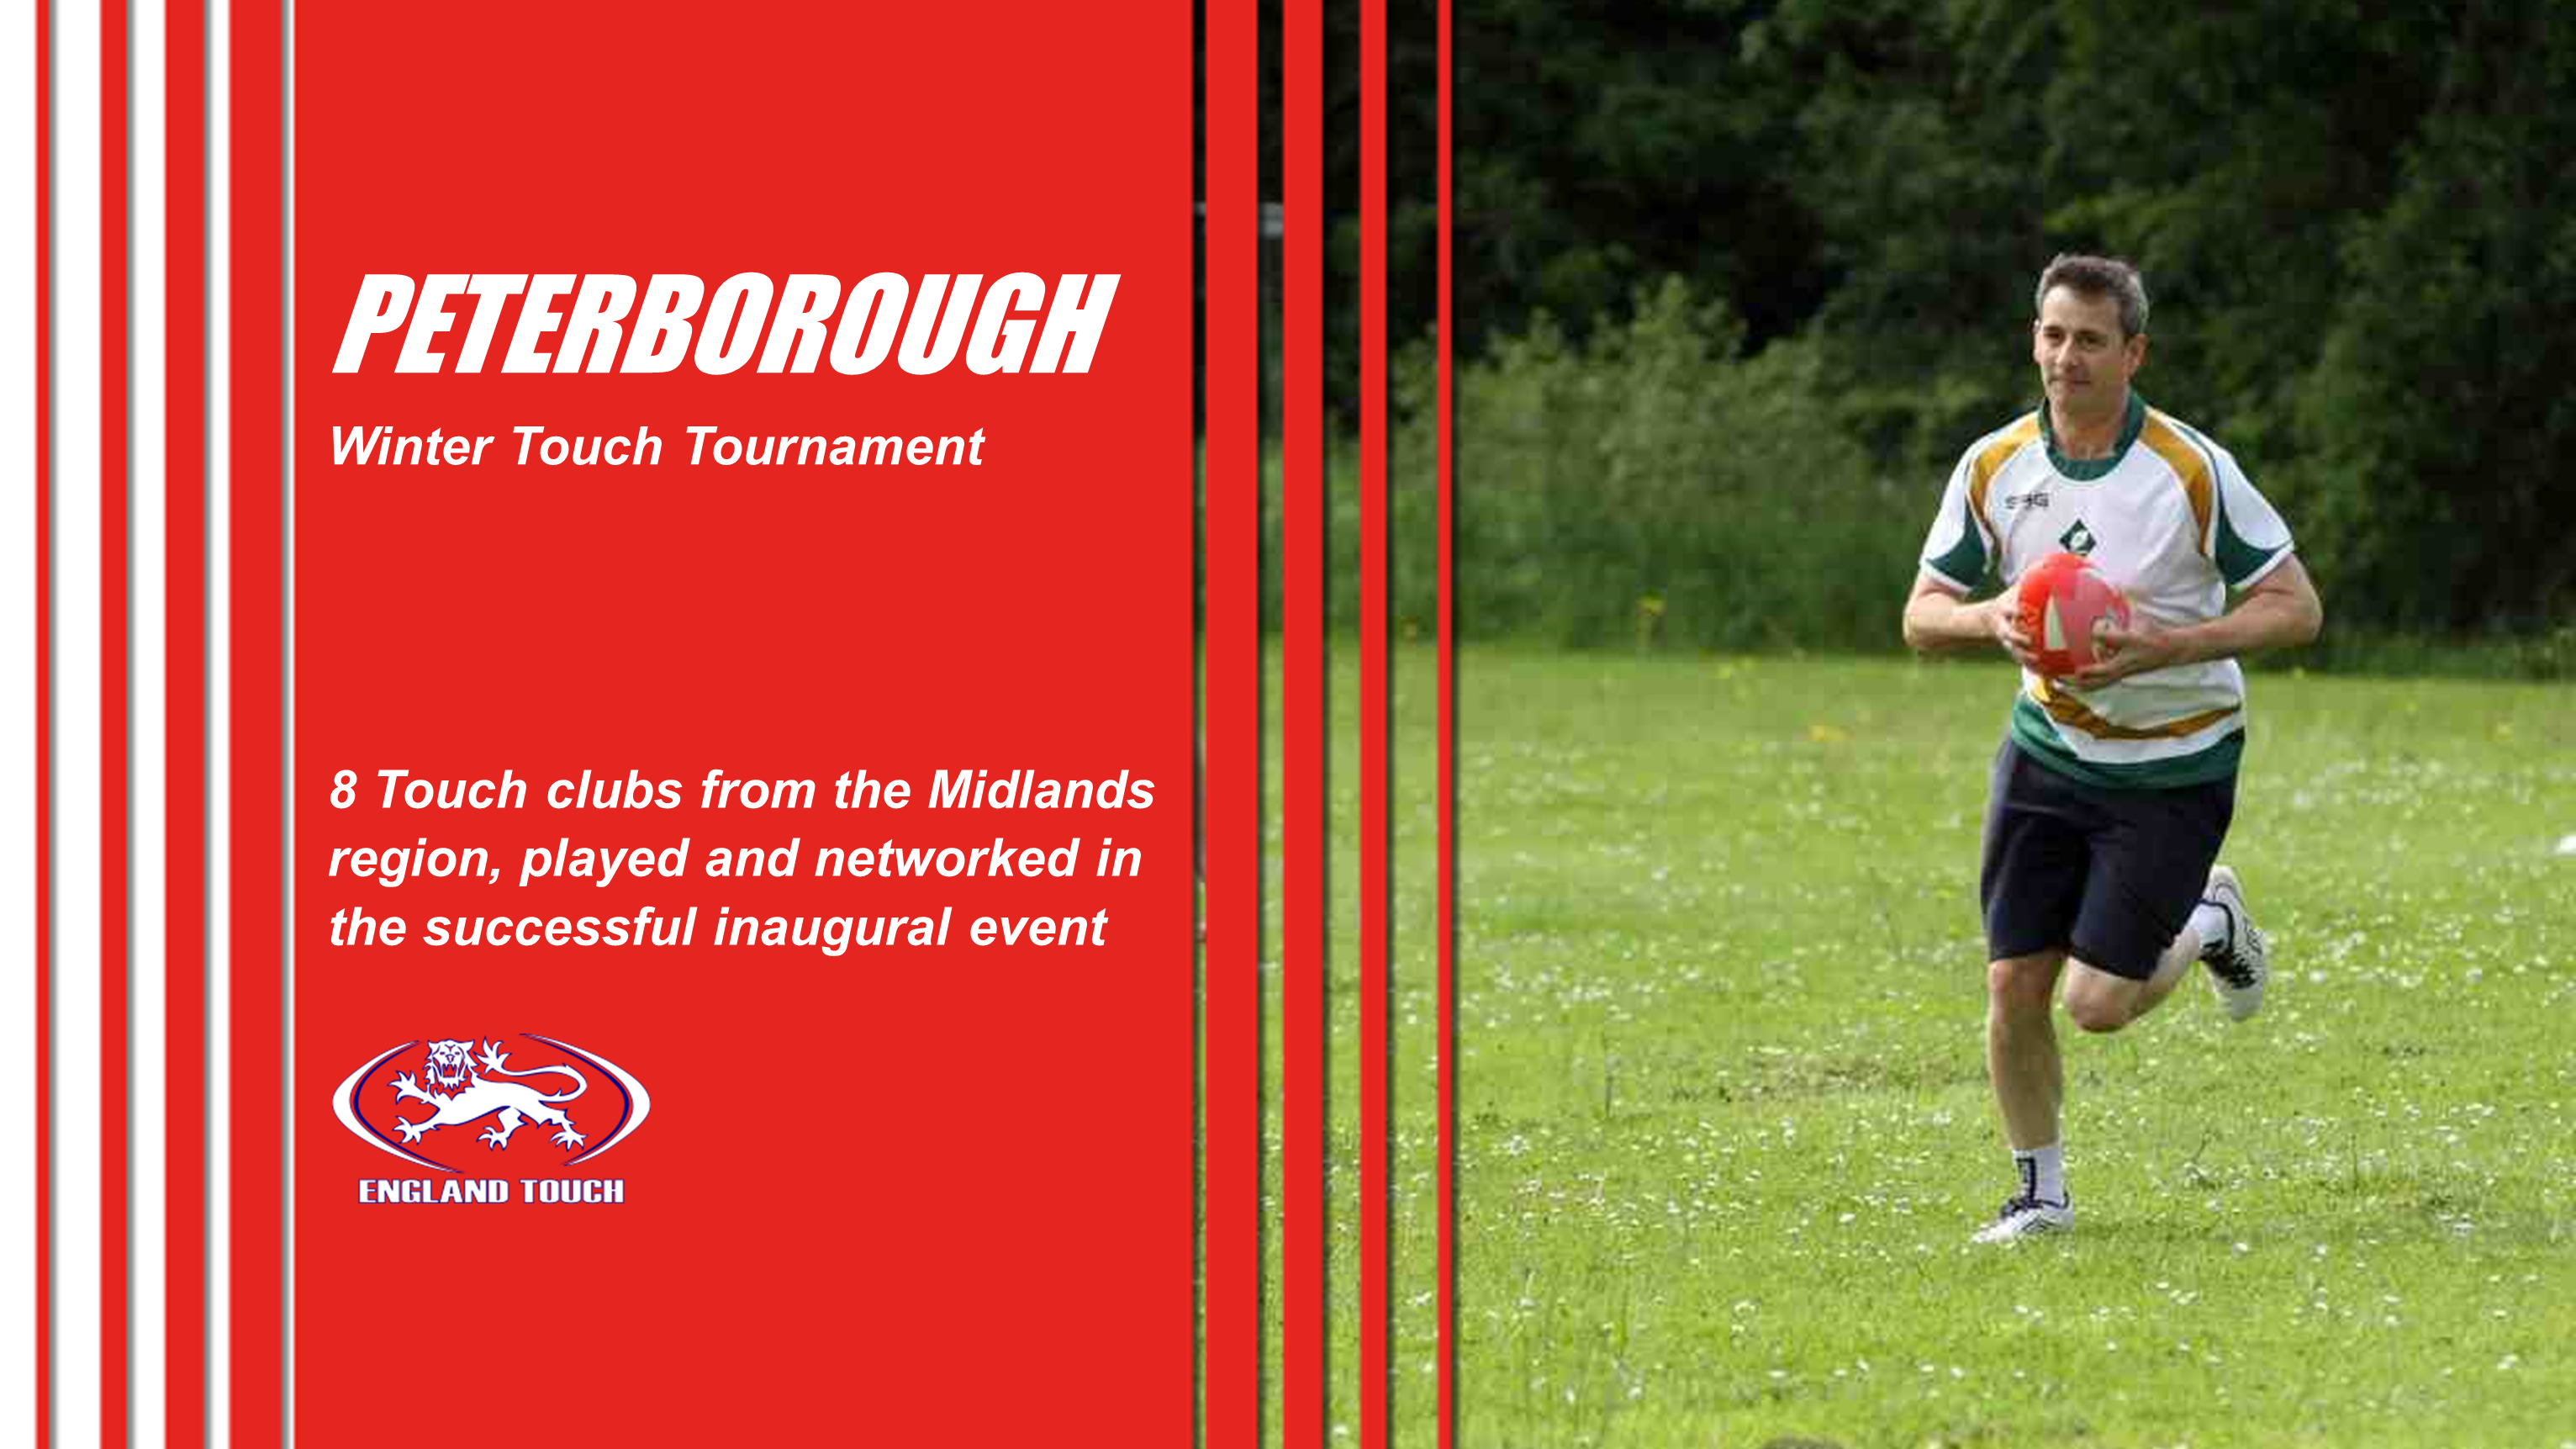 Peterborough Winter Touch Tournament